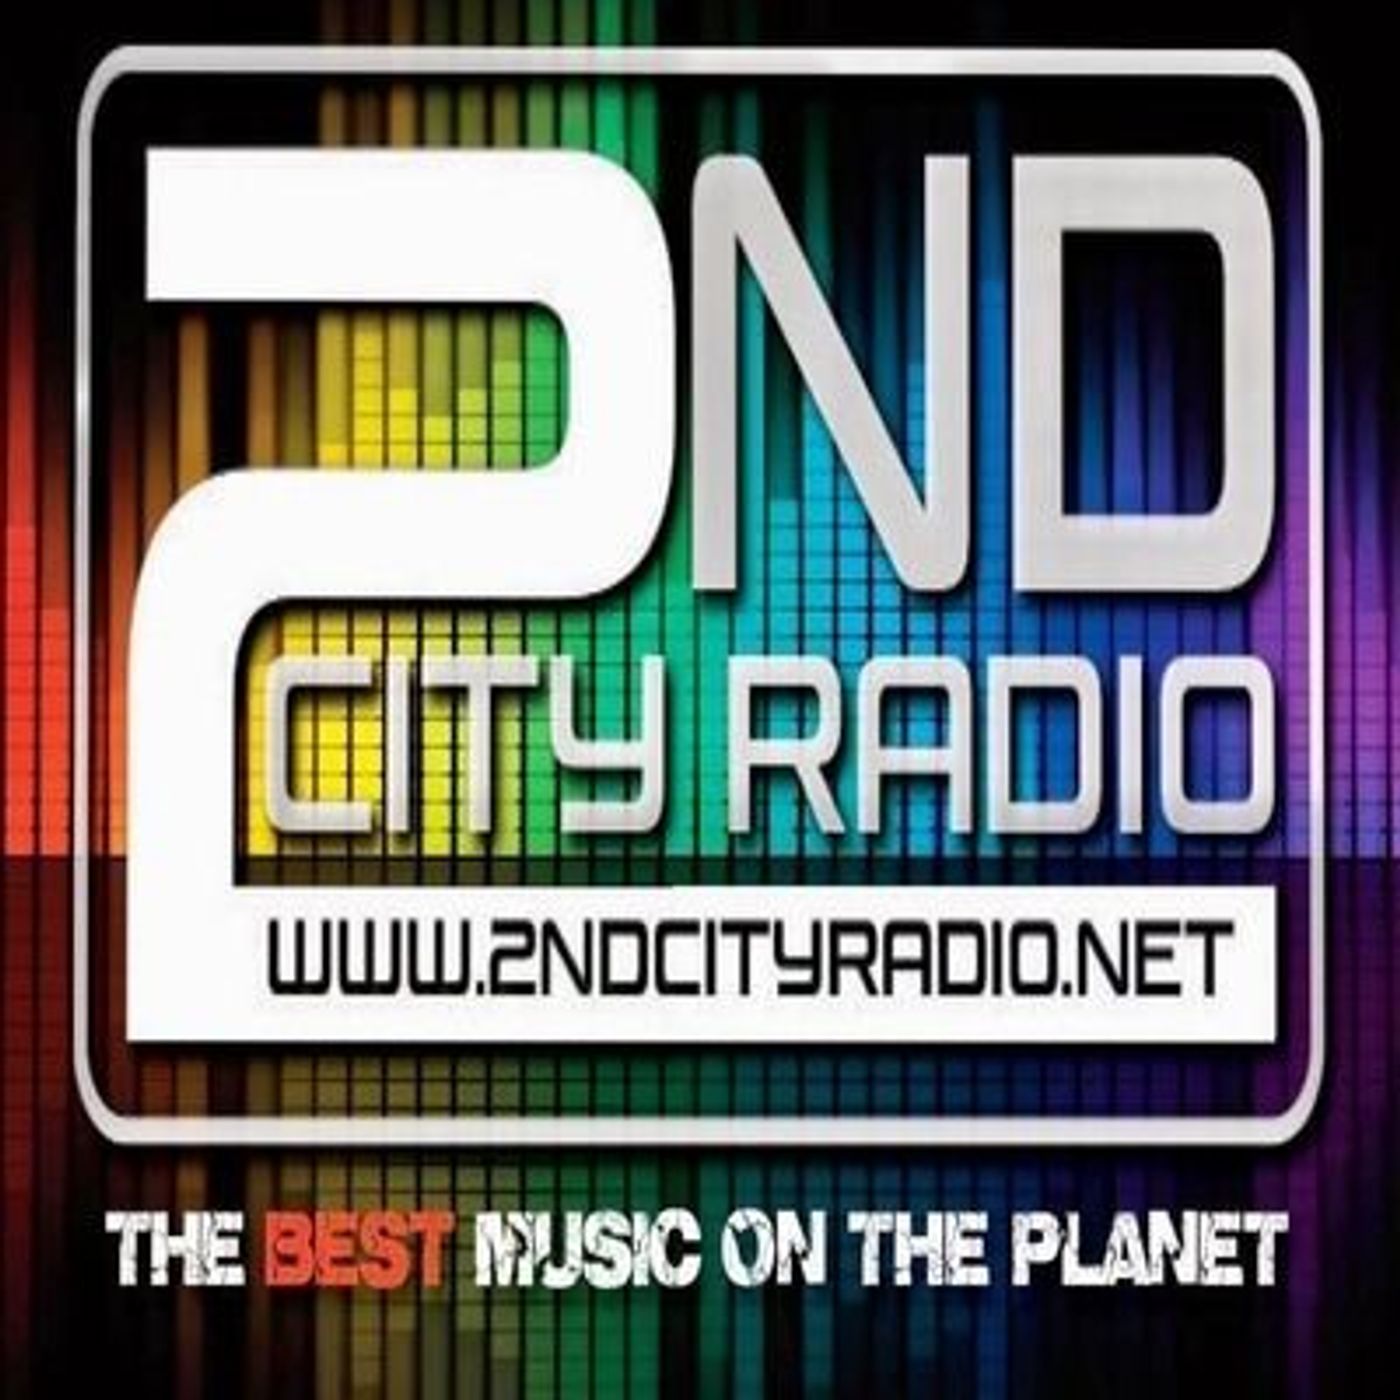 Wednesday the 4th of May 2022 on 2ndcity Radio with Classic Chat